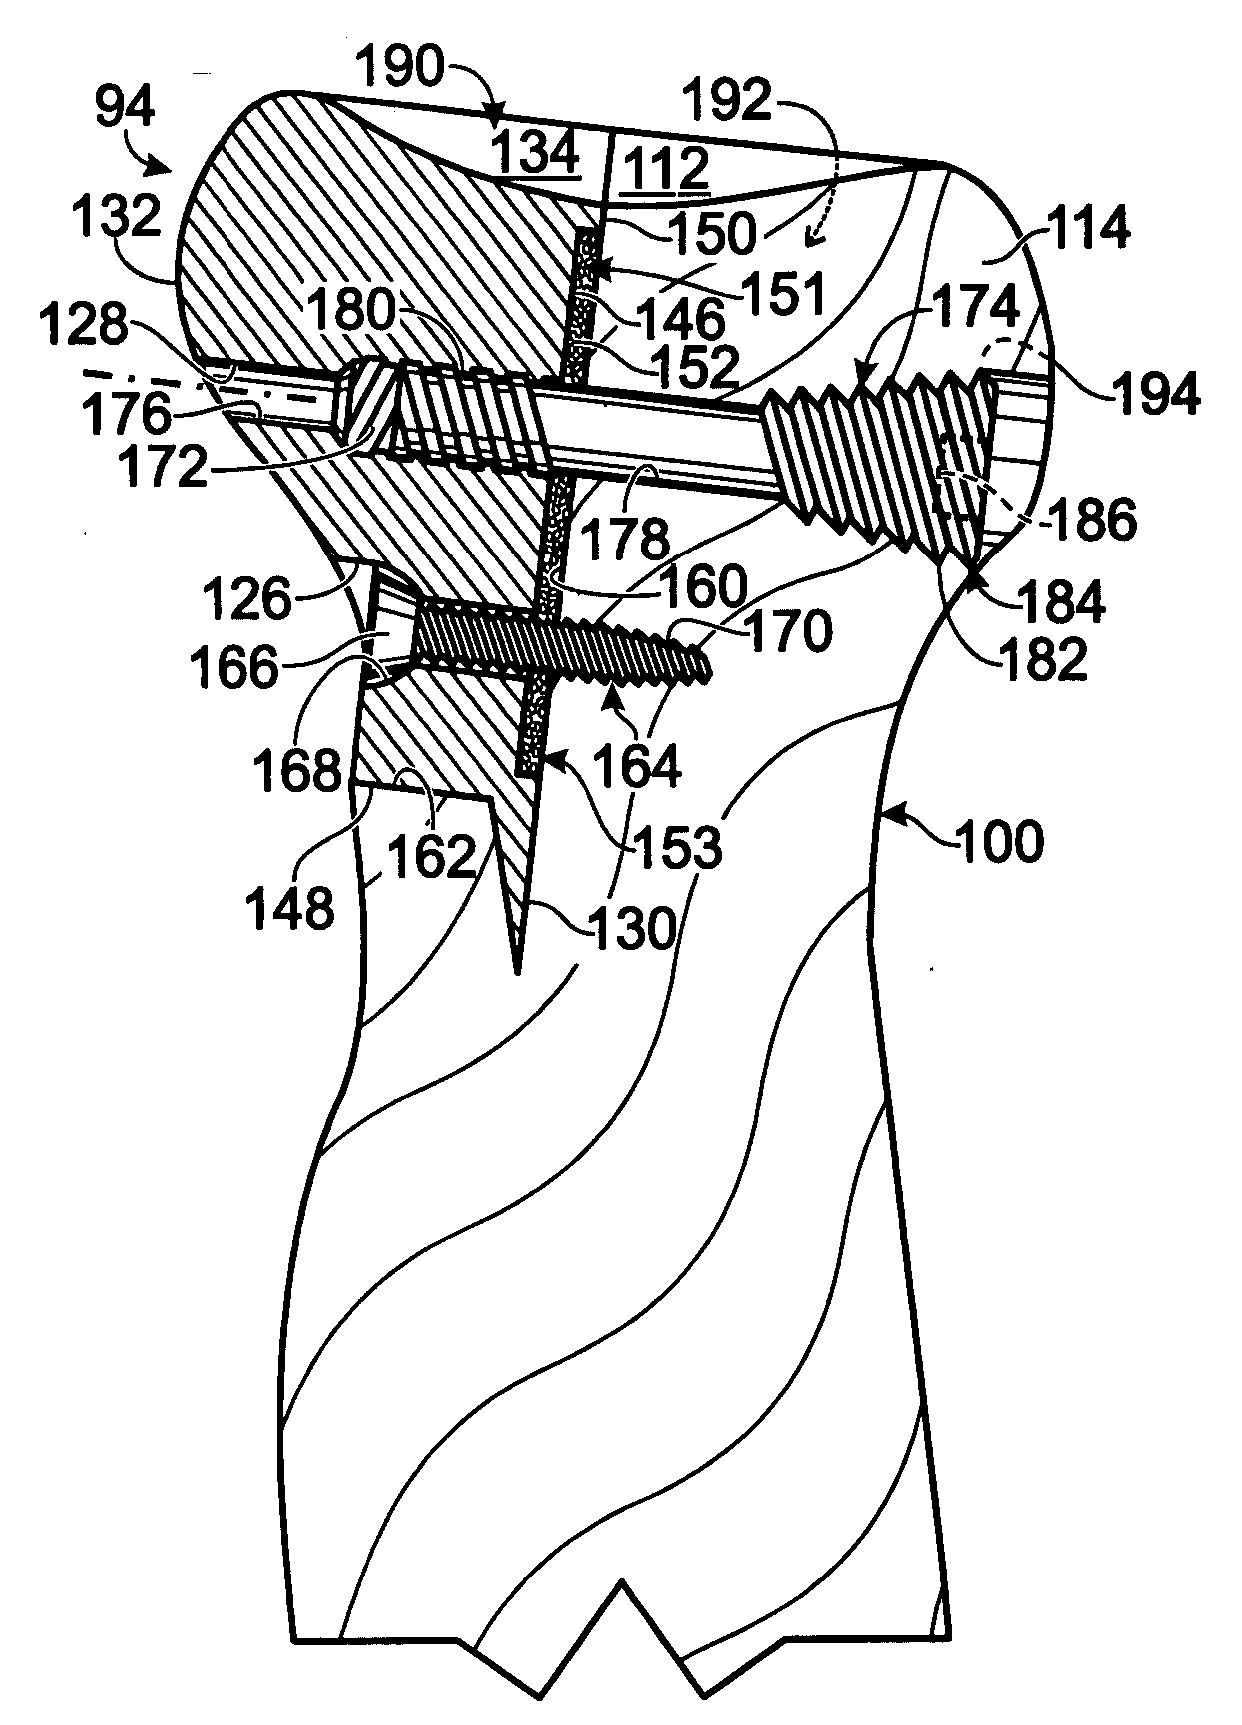 Prosthesis for partial replacement of an articulating surface on bone